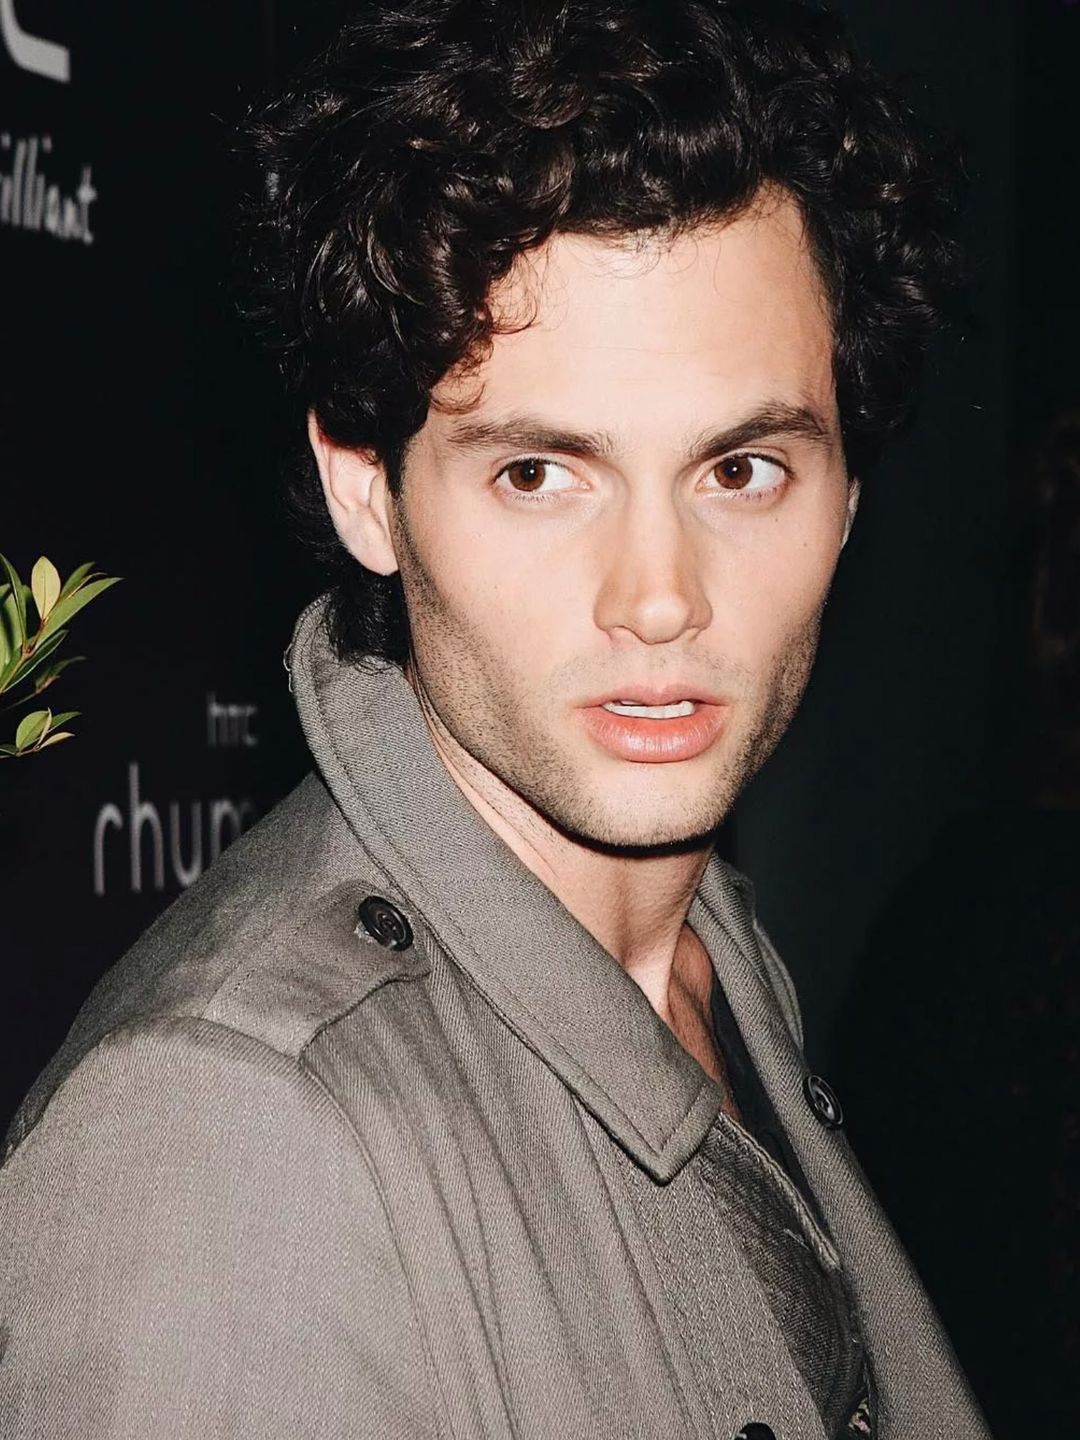 Penn Badgley does he have a wife